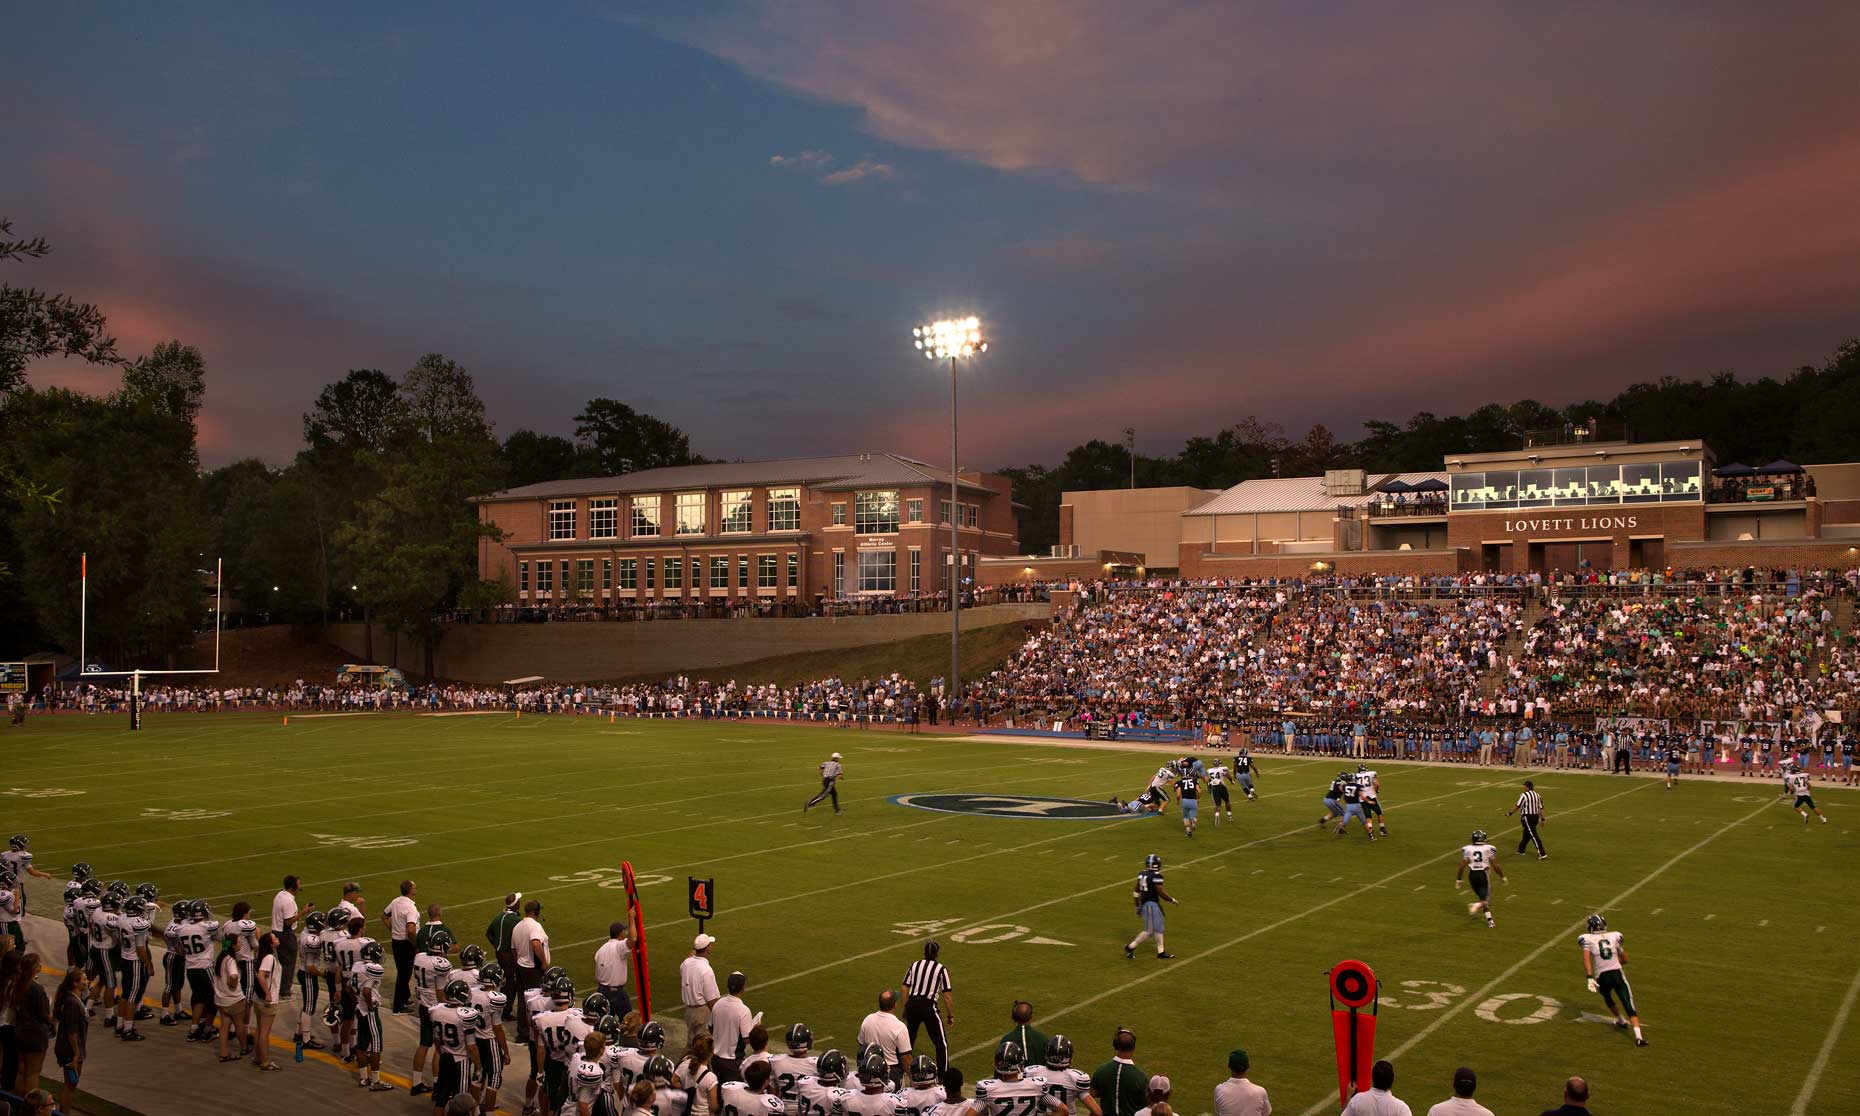 An exterior twilight view of a football game at the Lovett School Football Venue